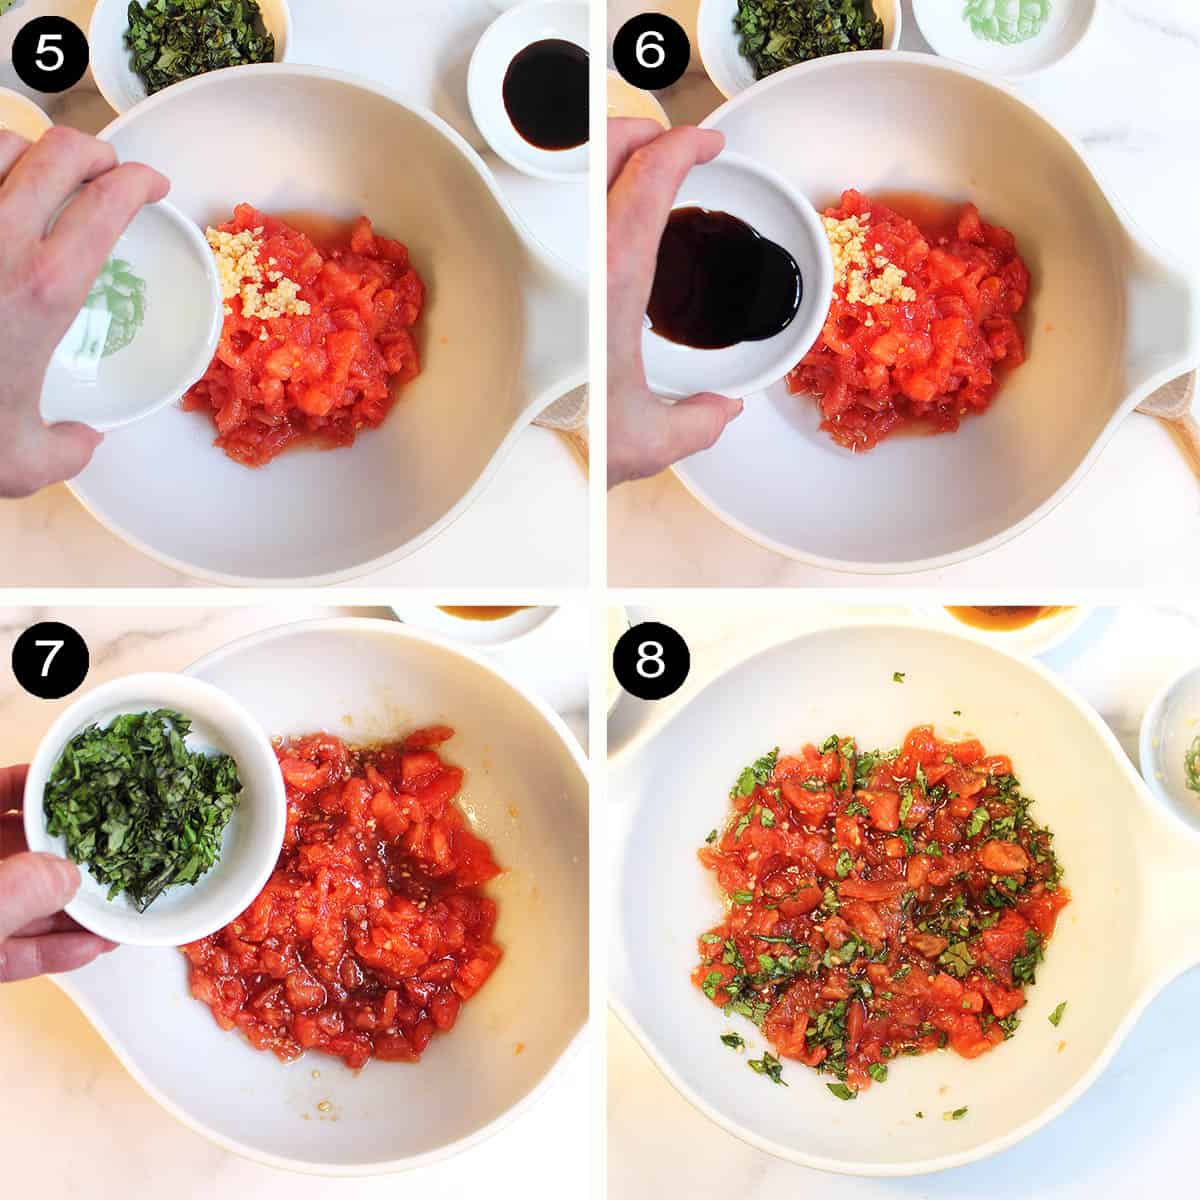 Steps to mix ingredients together. 